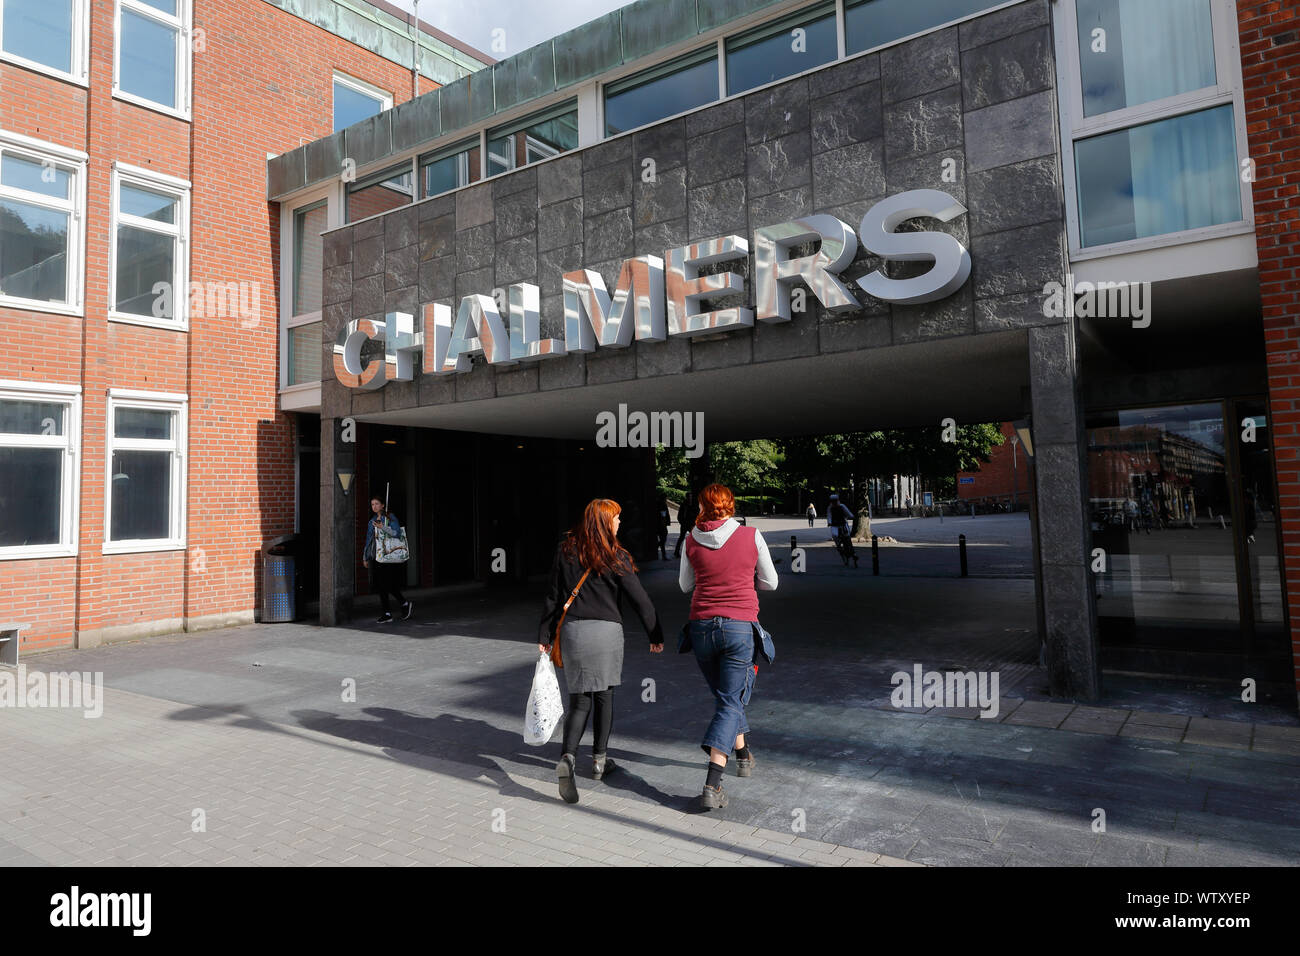 Gothenburg, Sweden - September 2, 2019: The entrance gate to the Chalmers university of Technology at Chalmersplatsen. Stock Photo